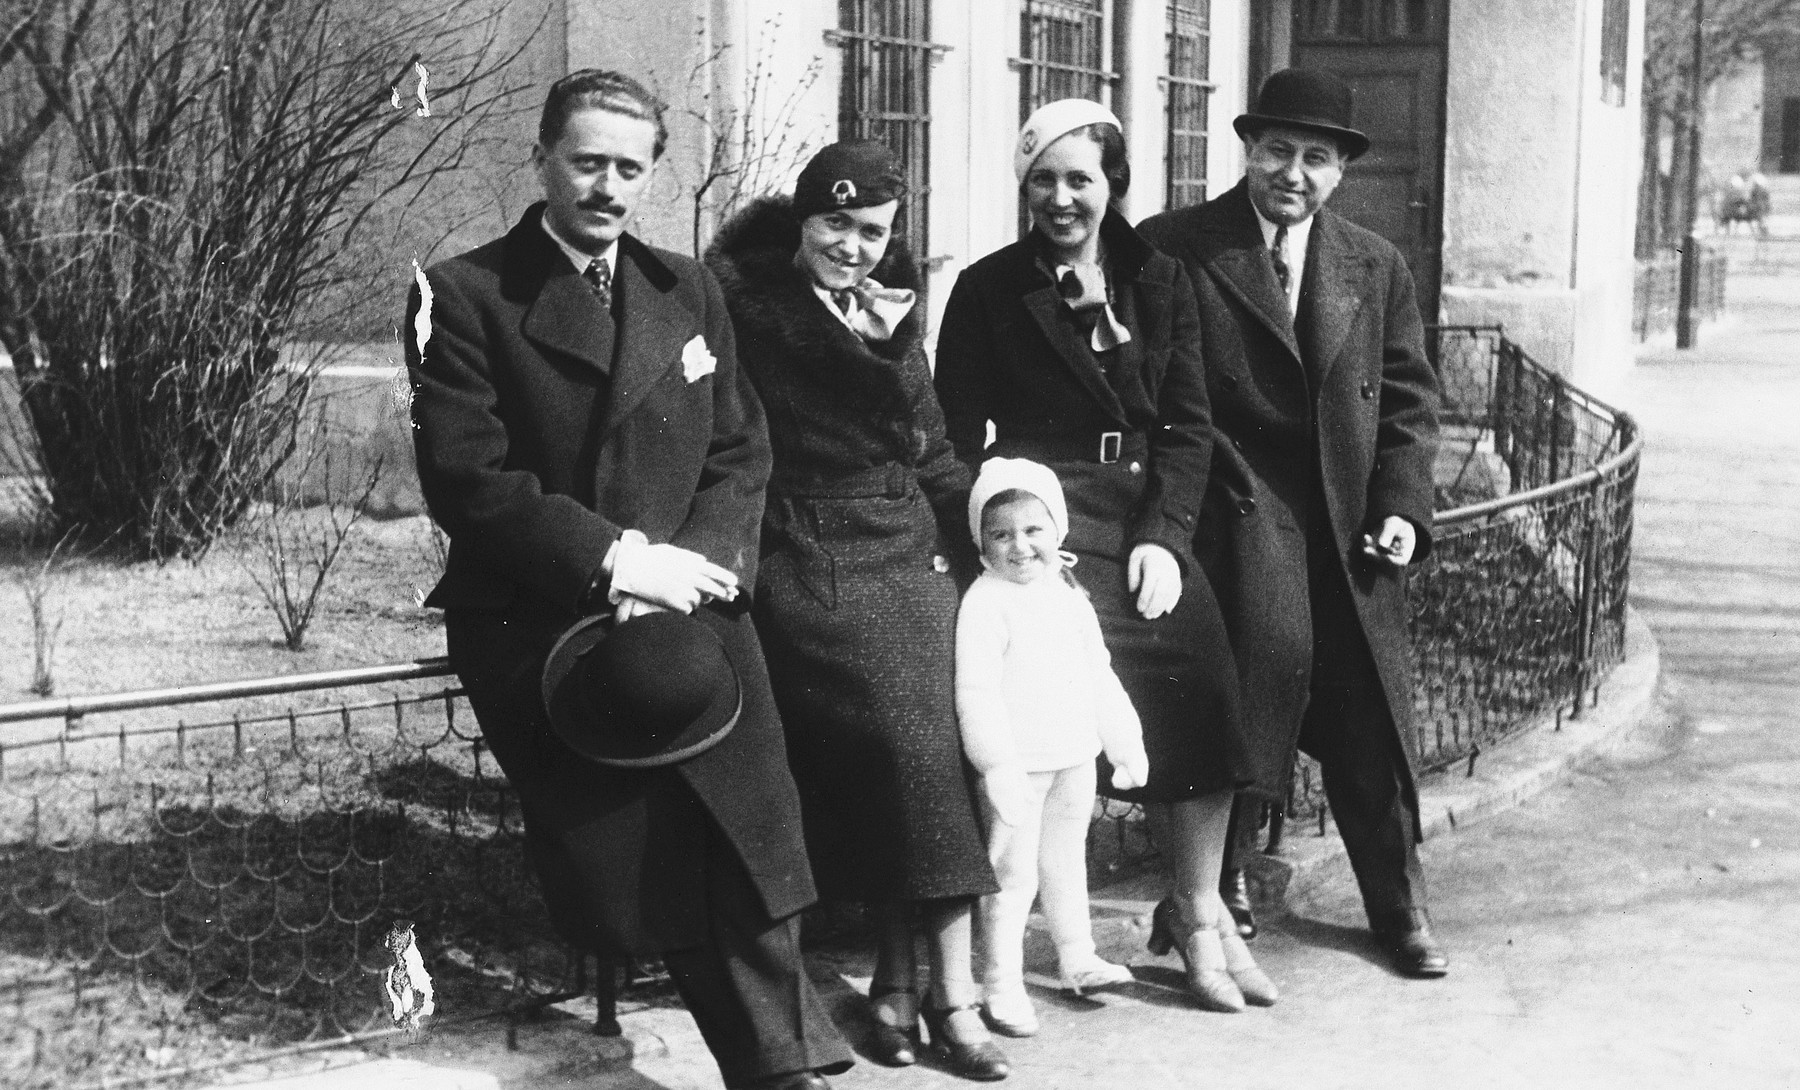 Portrait of the Weichherz family taken outside a building [probably in Bratislava].

From left to right: are Karol Ripper (a family friend in Bratislava who later died in the Holocaust), Esti Weichherz, Kitty Weichherz, Rudica Zoltan, (the wife of Bela`s brother Marcel who survived Ravensbrueck), and Bela Weichherz.

This photo was taken from the diary of Kitty's life written by her father, Bela Weichherz.